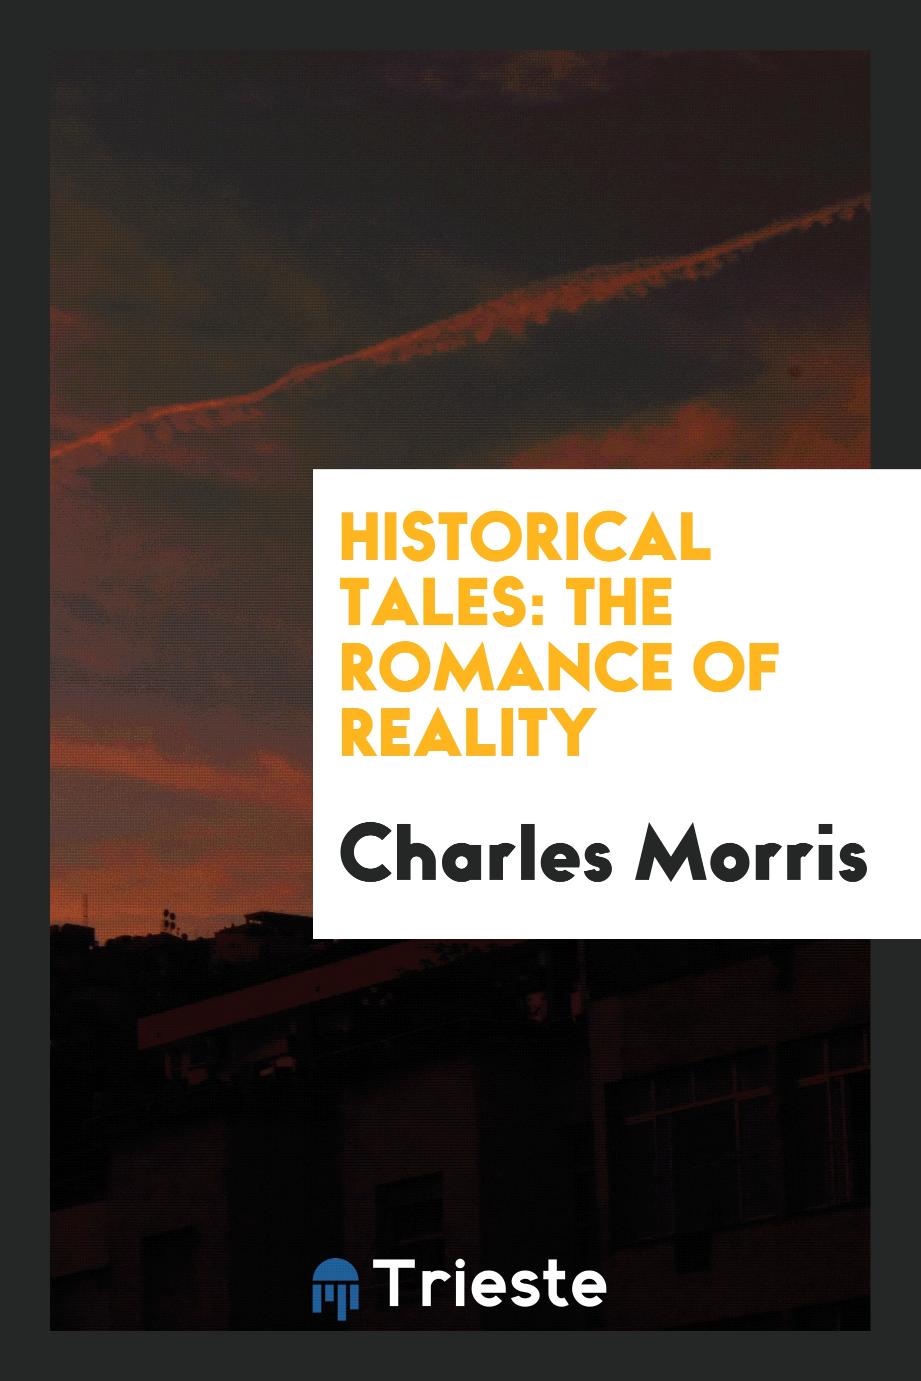 Historical Tales: The Romance of Reality